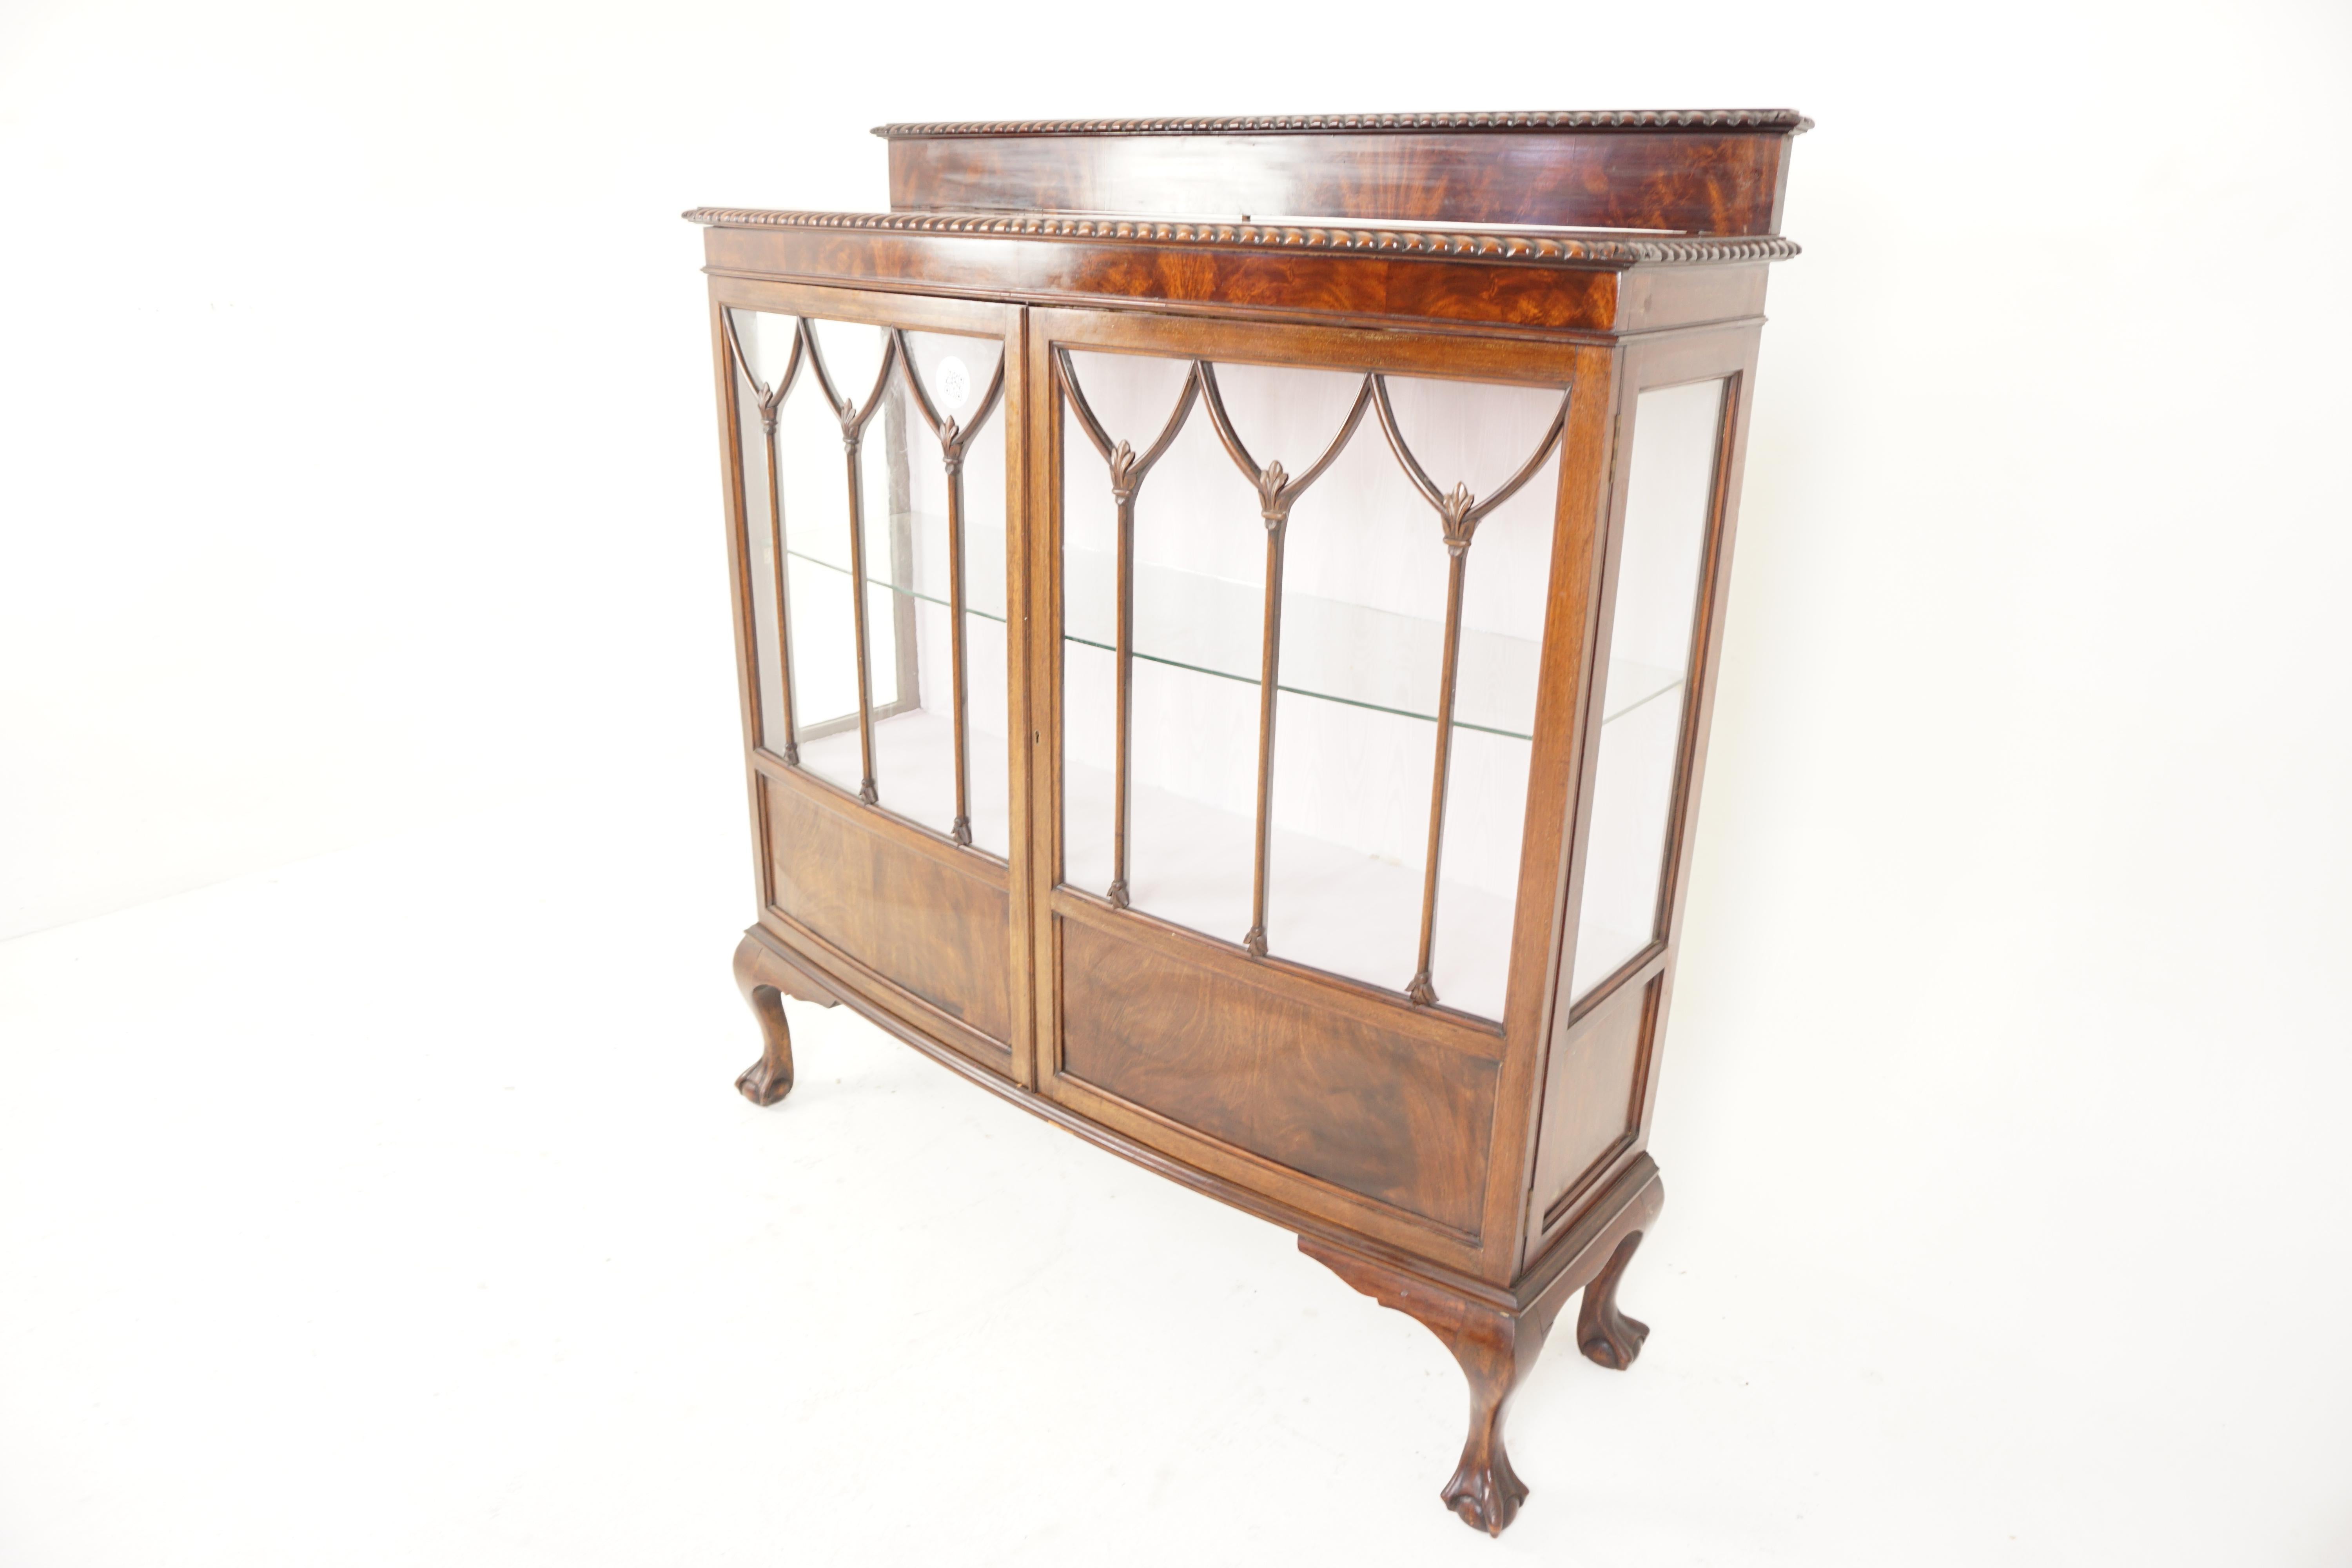 Large Ant. walnut bow front display cabinet, China Cabinet, Scotland 1910, H807

Scotland 1910
Solid walnut + veneers
Original Finish
Pediment on the back with pie crust edge
Wonderful top with bow front and pie crust edge
Pair of original